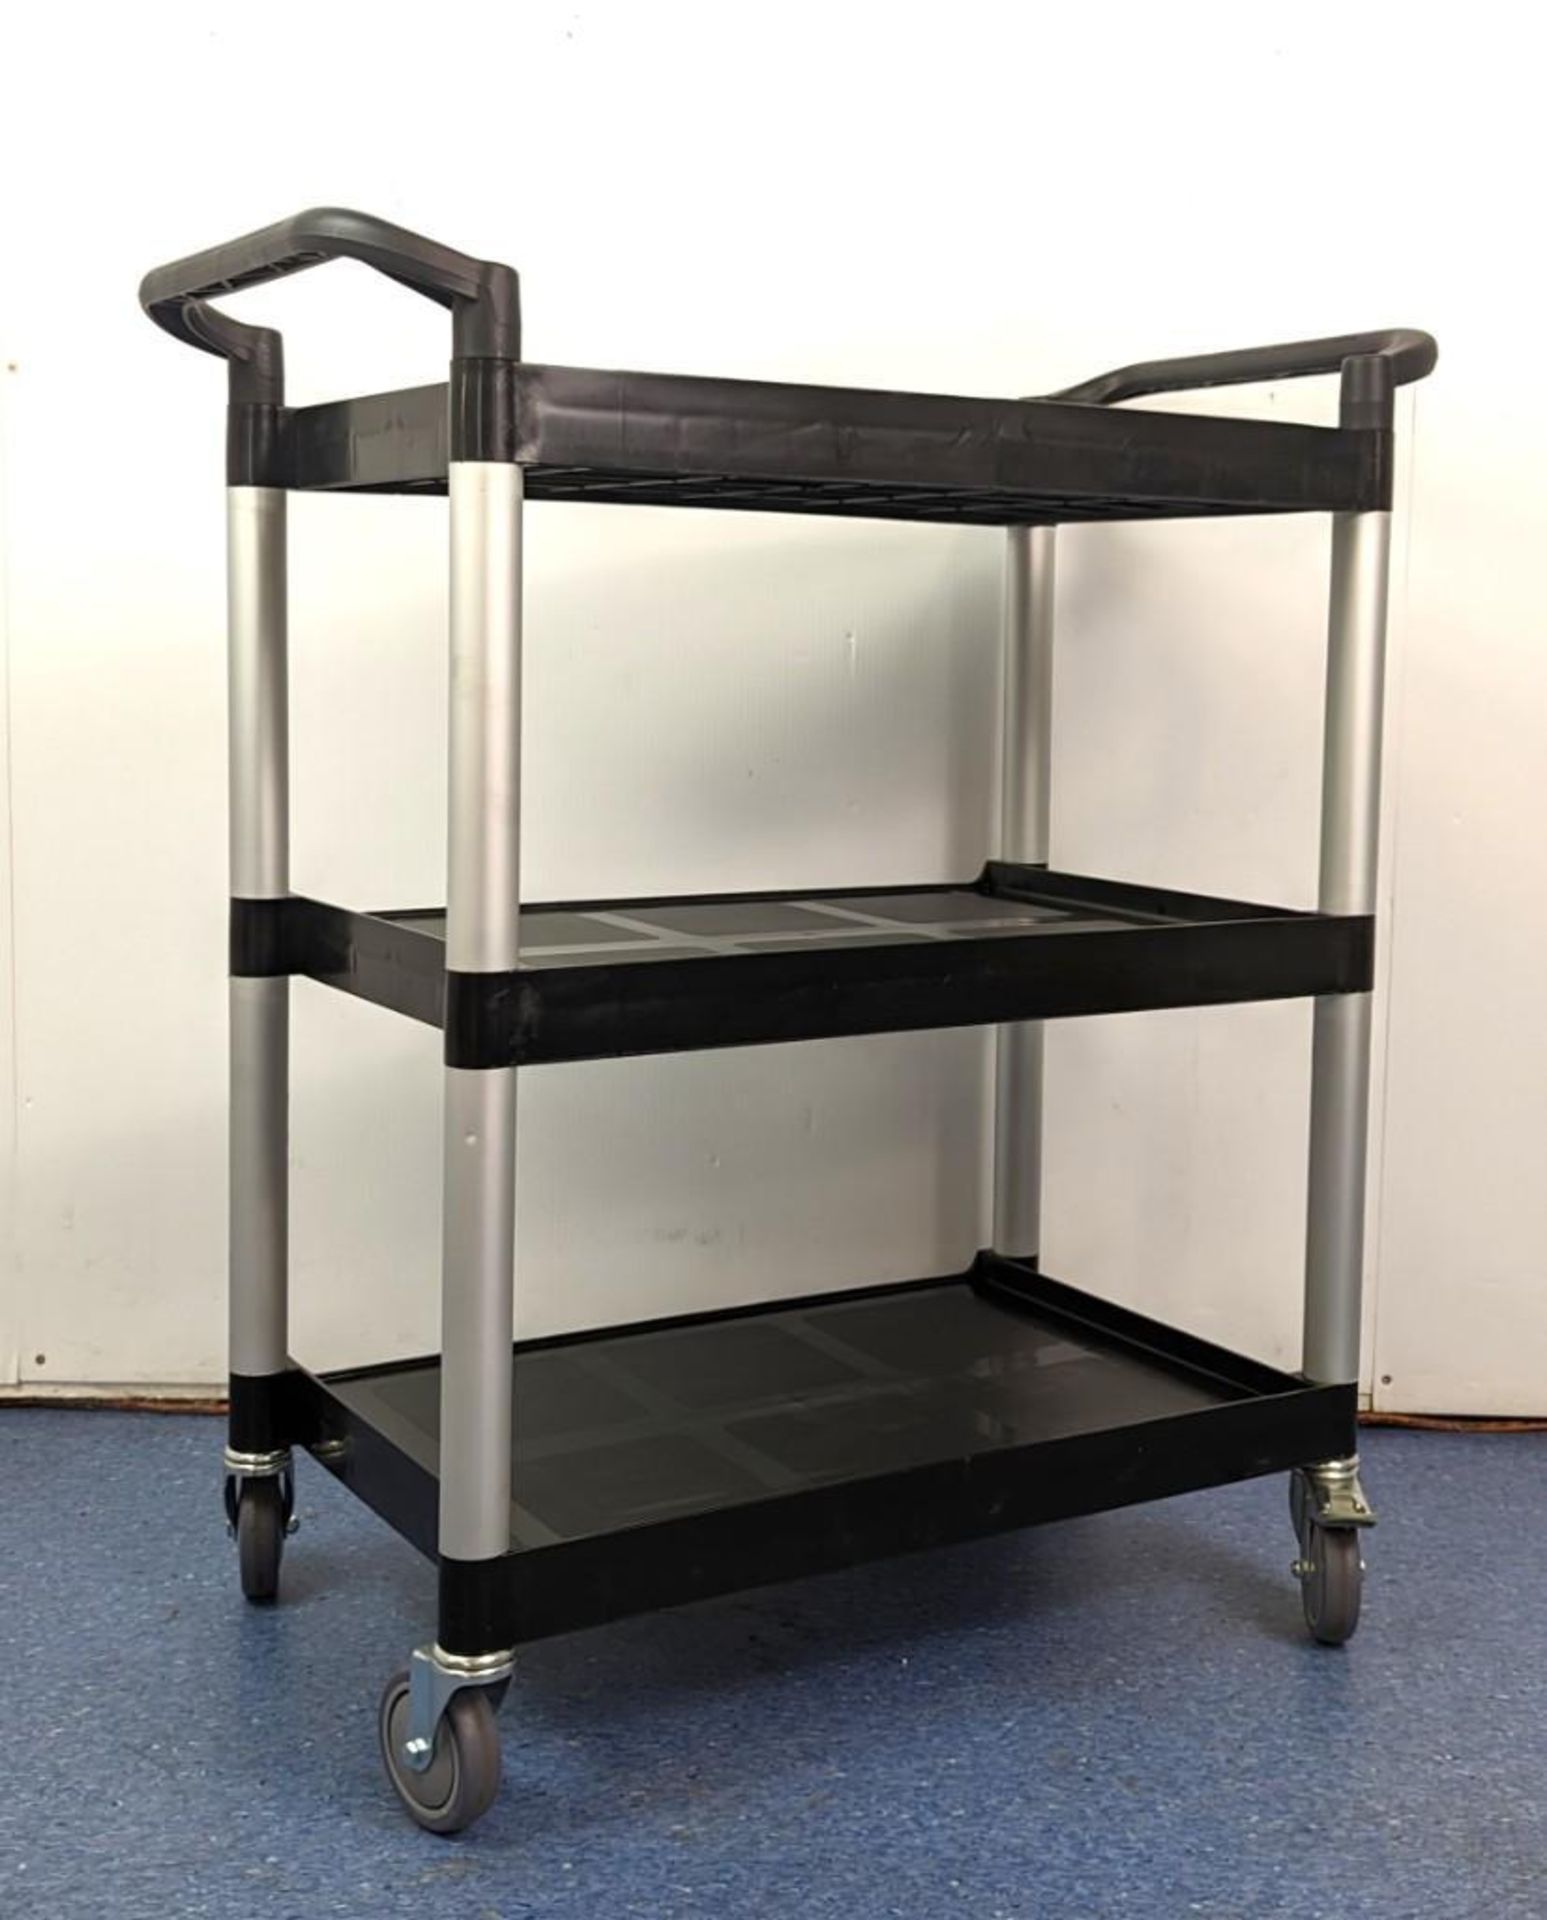 24" X 16" BLACK PLASTIC 3 TIER BUSSING CART - NEW - OMCAN 24183